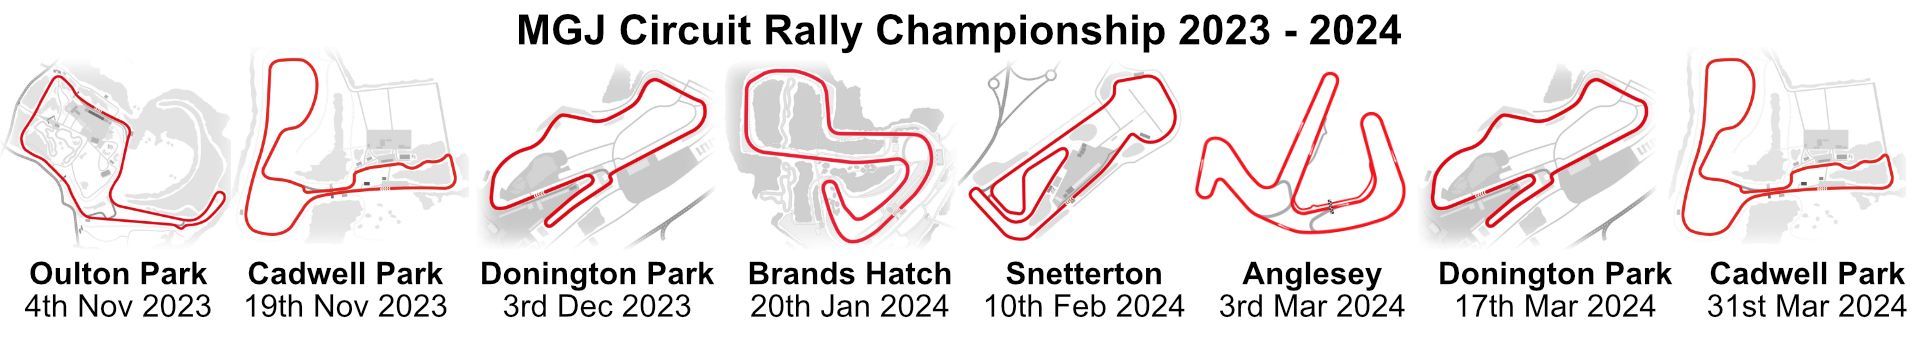 MGJ Circuit Rally Championship rounds and dates